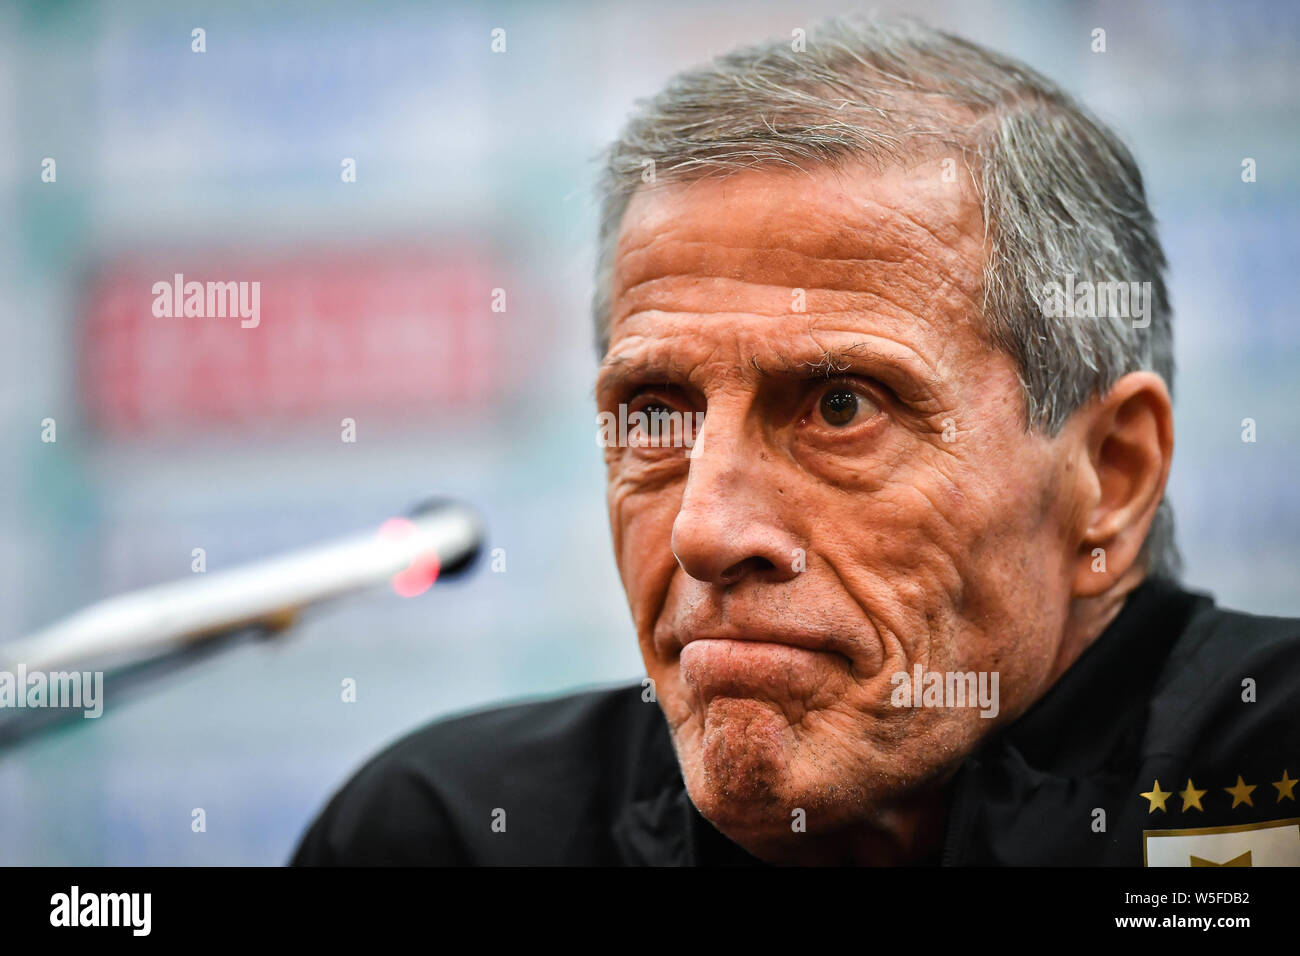 Head coach Oscar Tabarez of Uruguay national football team attends a press conference after defeating Thailand national football team for the 2019 Chi Stock Photo